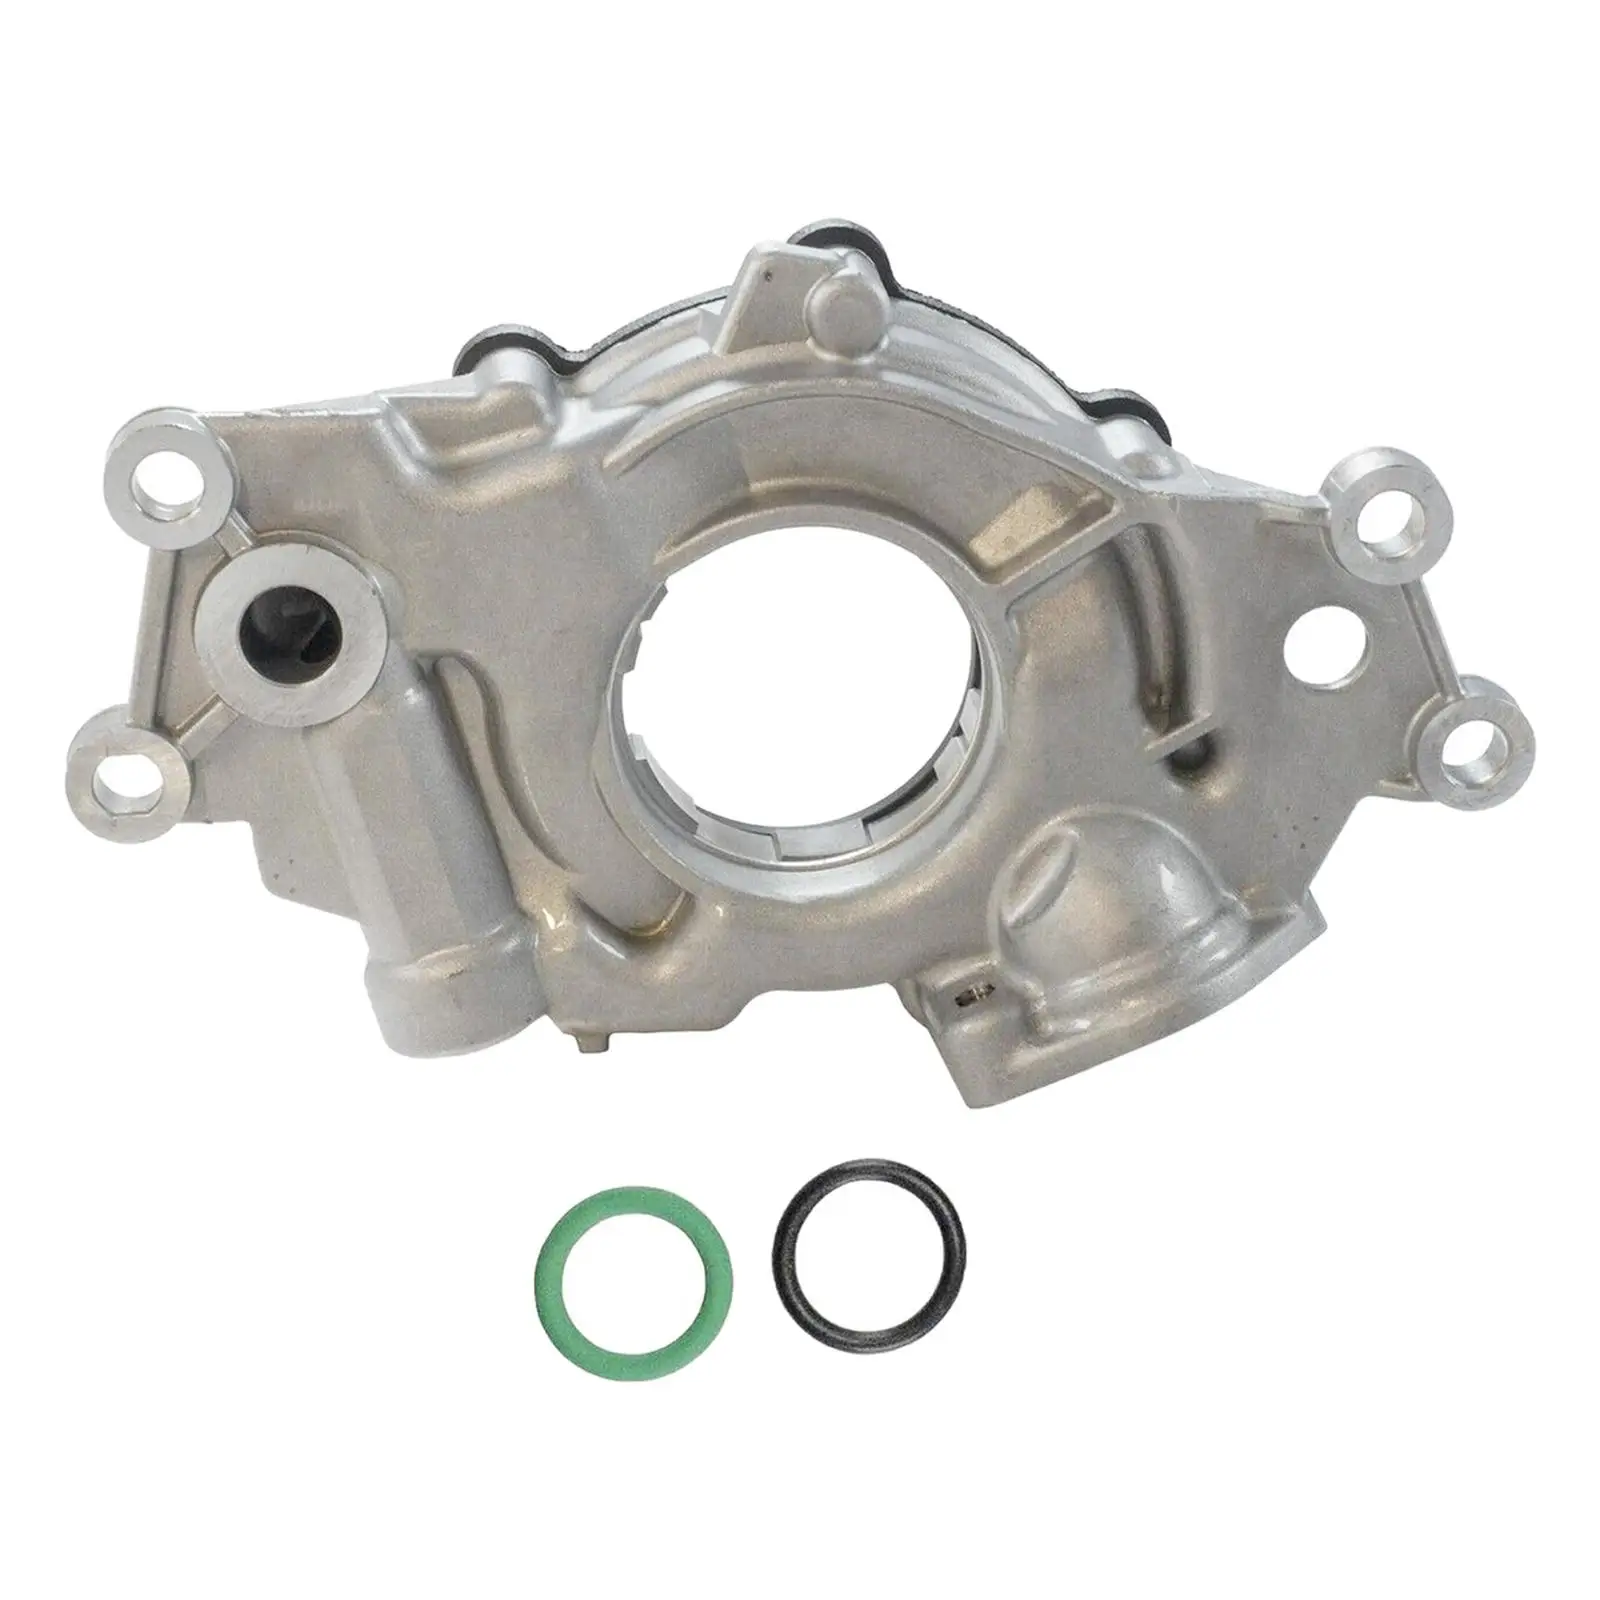 Engine Oil Pump Easy Installation Direct Replace Auto Accessories for Gen 4 Ls-based Engines 5.3L 6.0L 6.2L L76 LC9 Lmf LH9